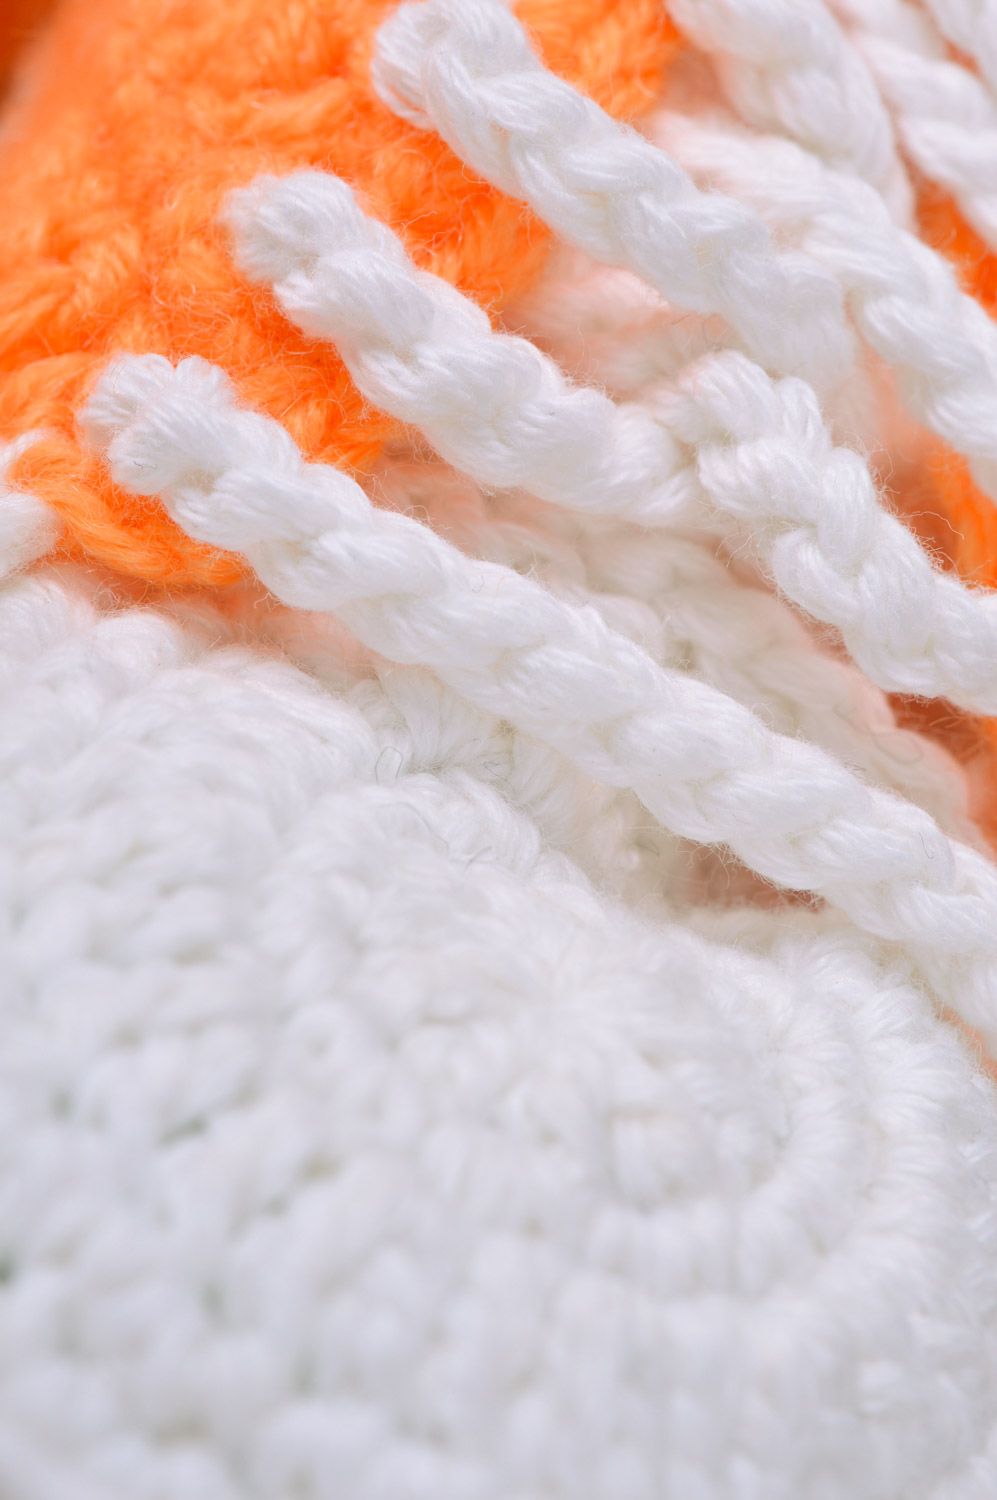 Handmade crocheted small orange and white baby shoes with shoelaces photo 4